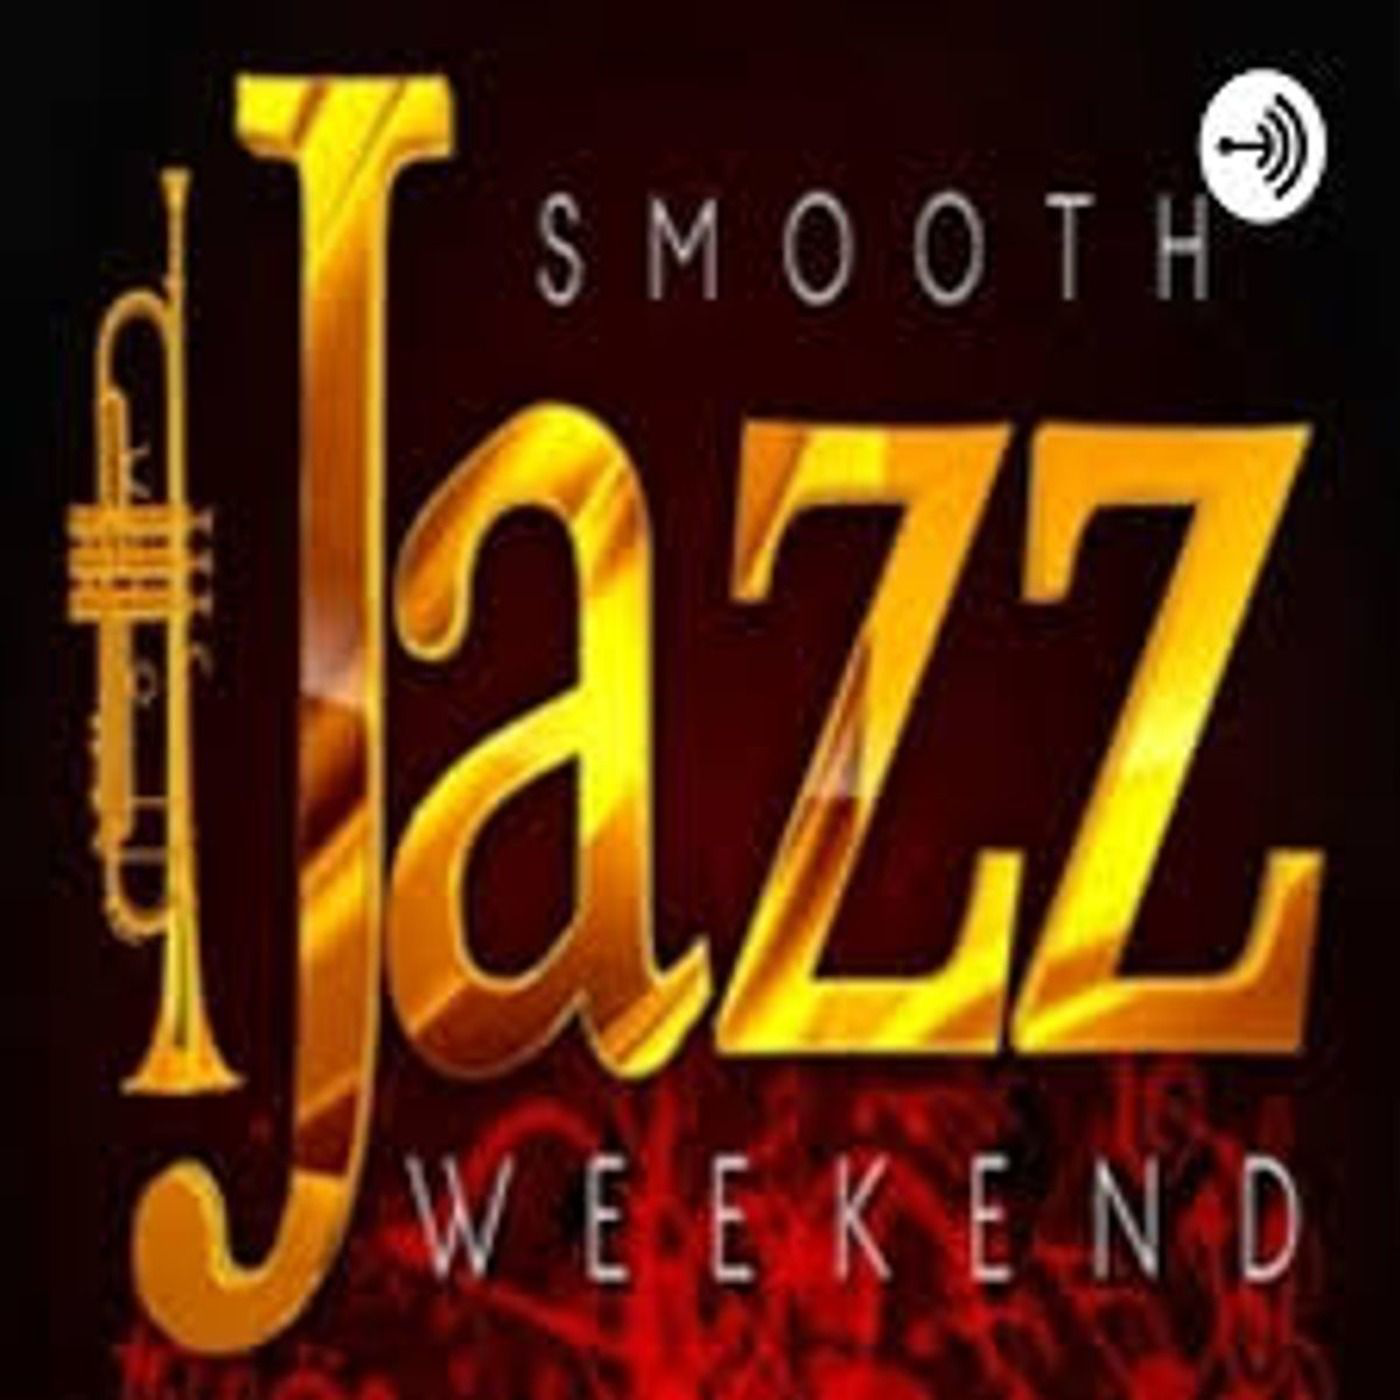 A highlight from Smooth Jazz Weekend with Tina E. (Sugar Love)